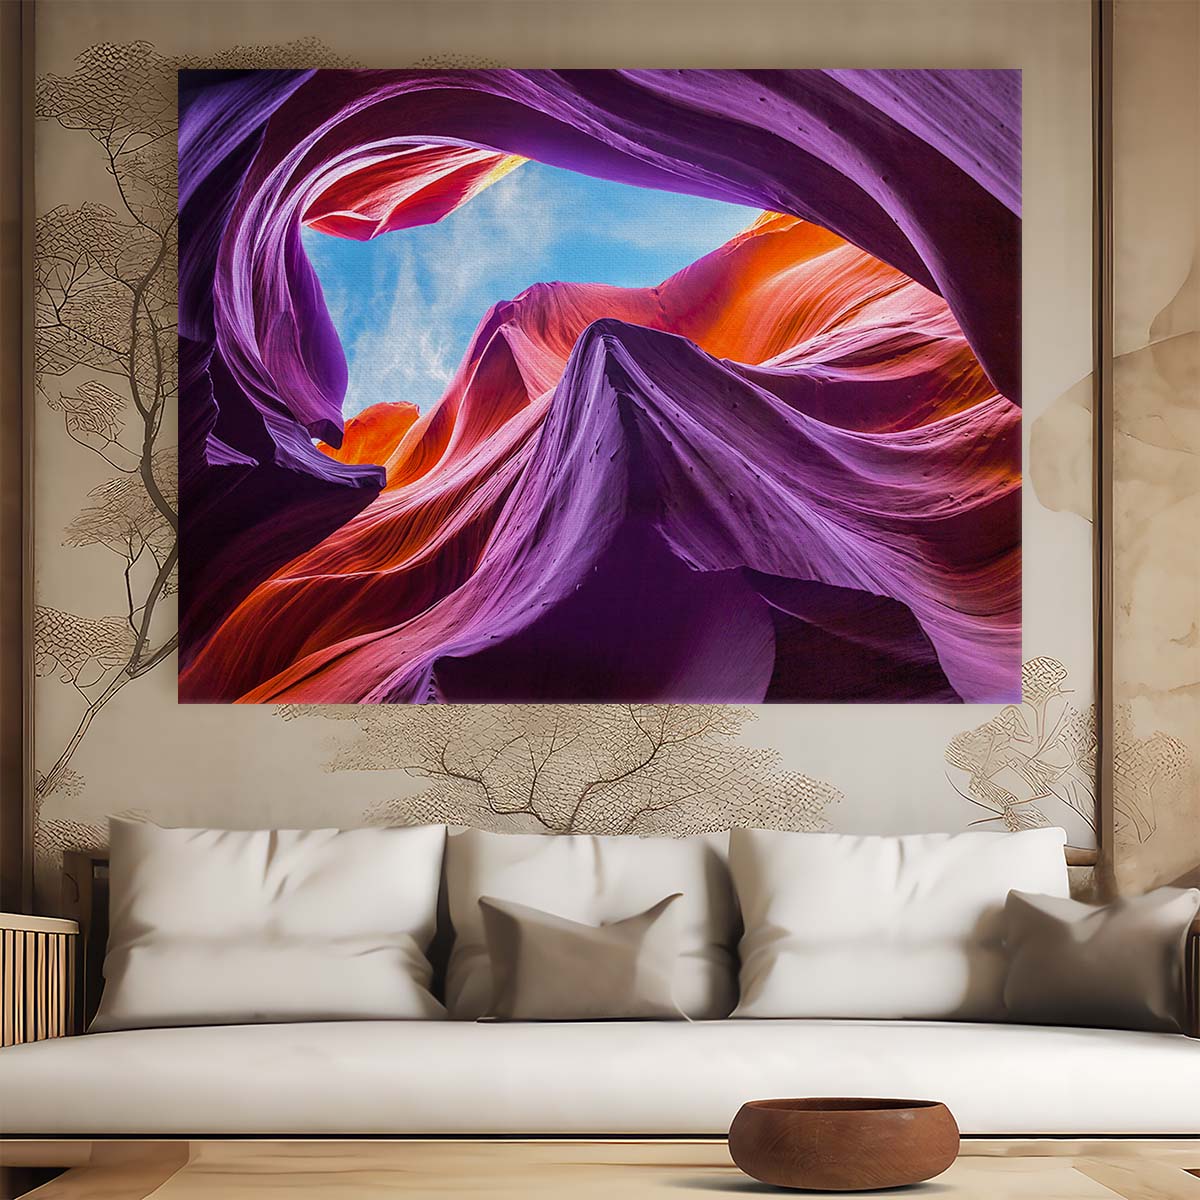 Vibrant Antelope Canyon Arizona Landscape Wall Art by Luxuriance Designs. Made in USA.